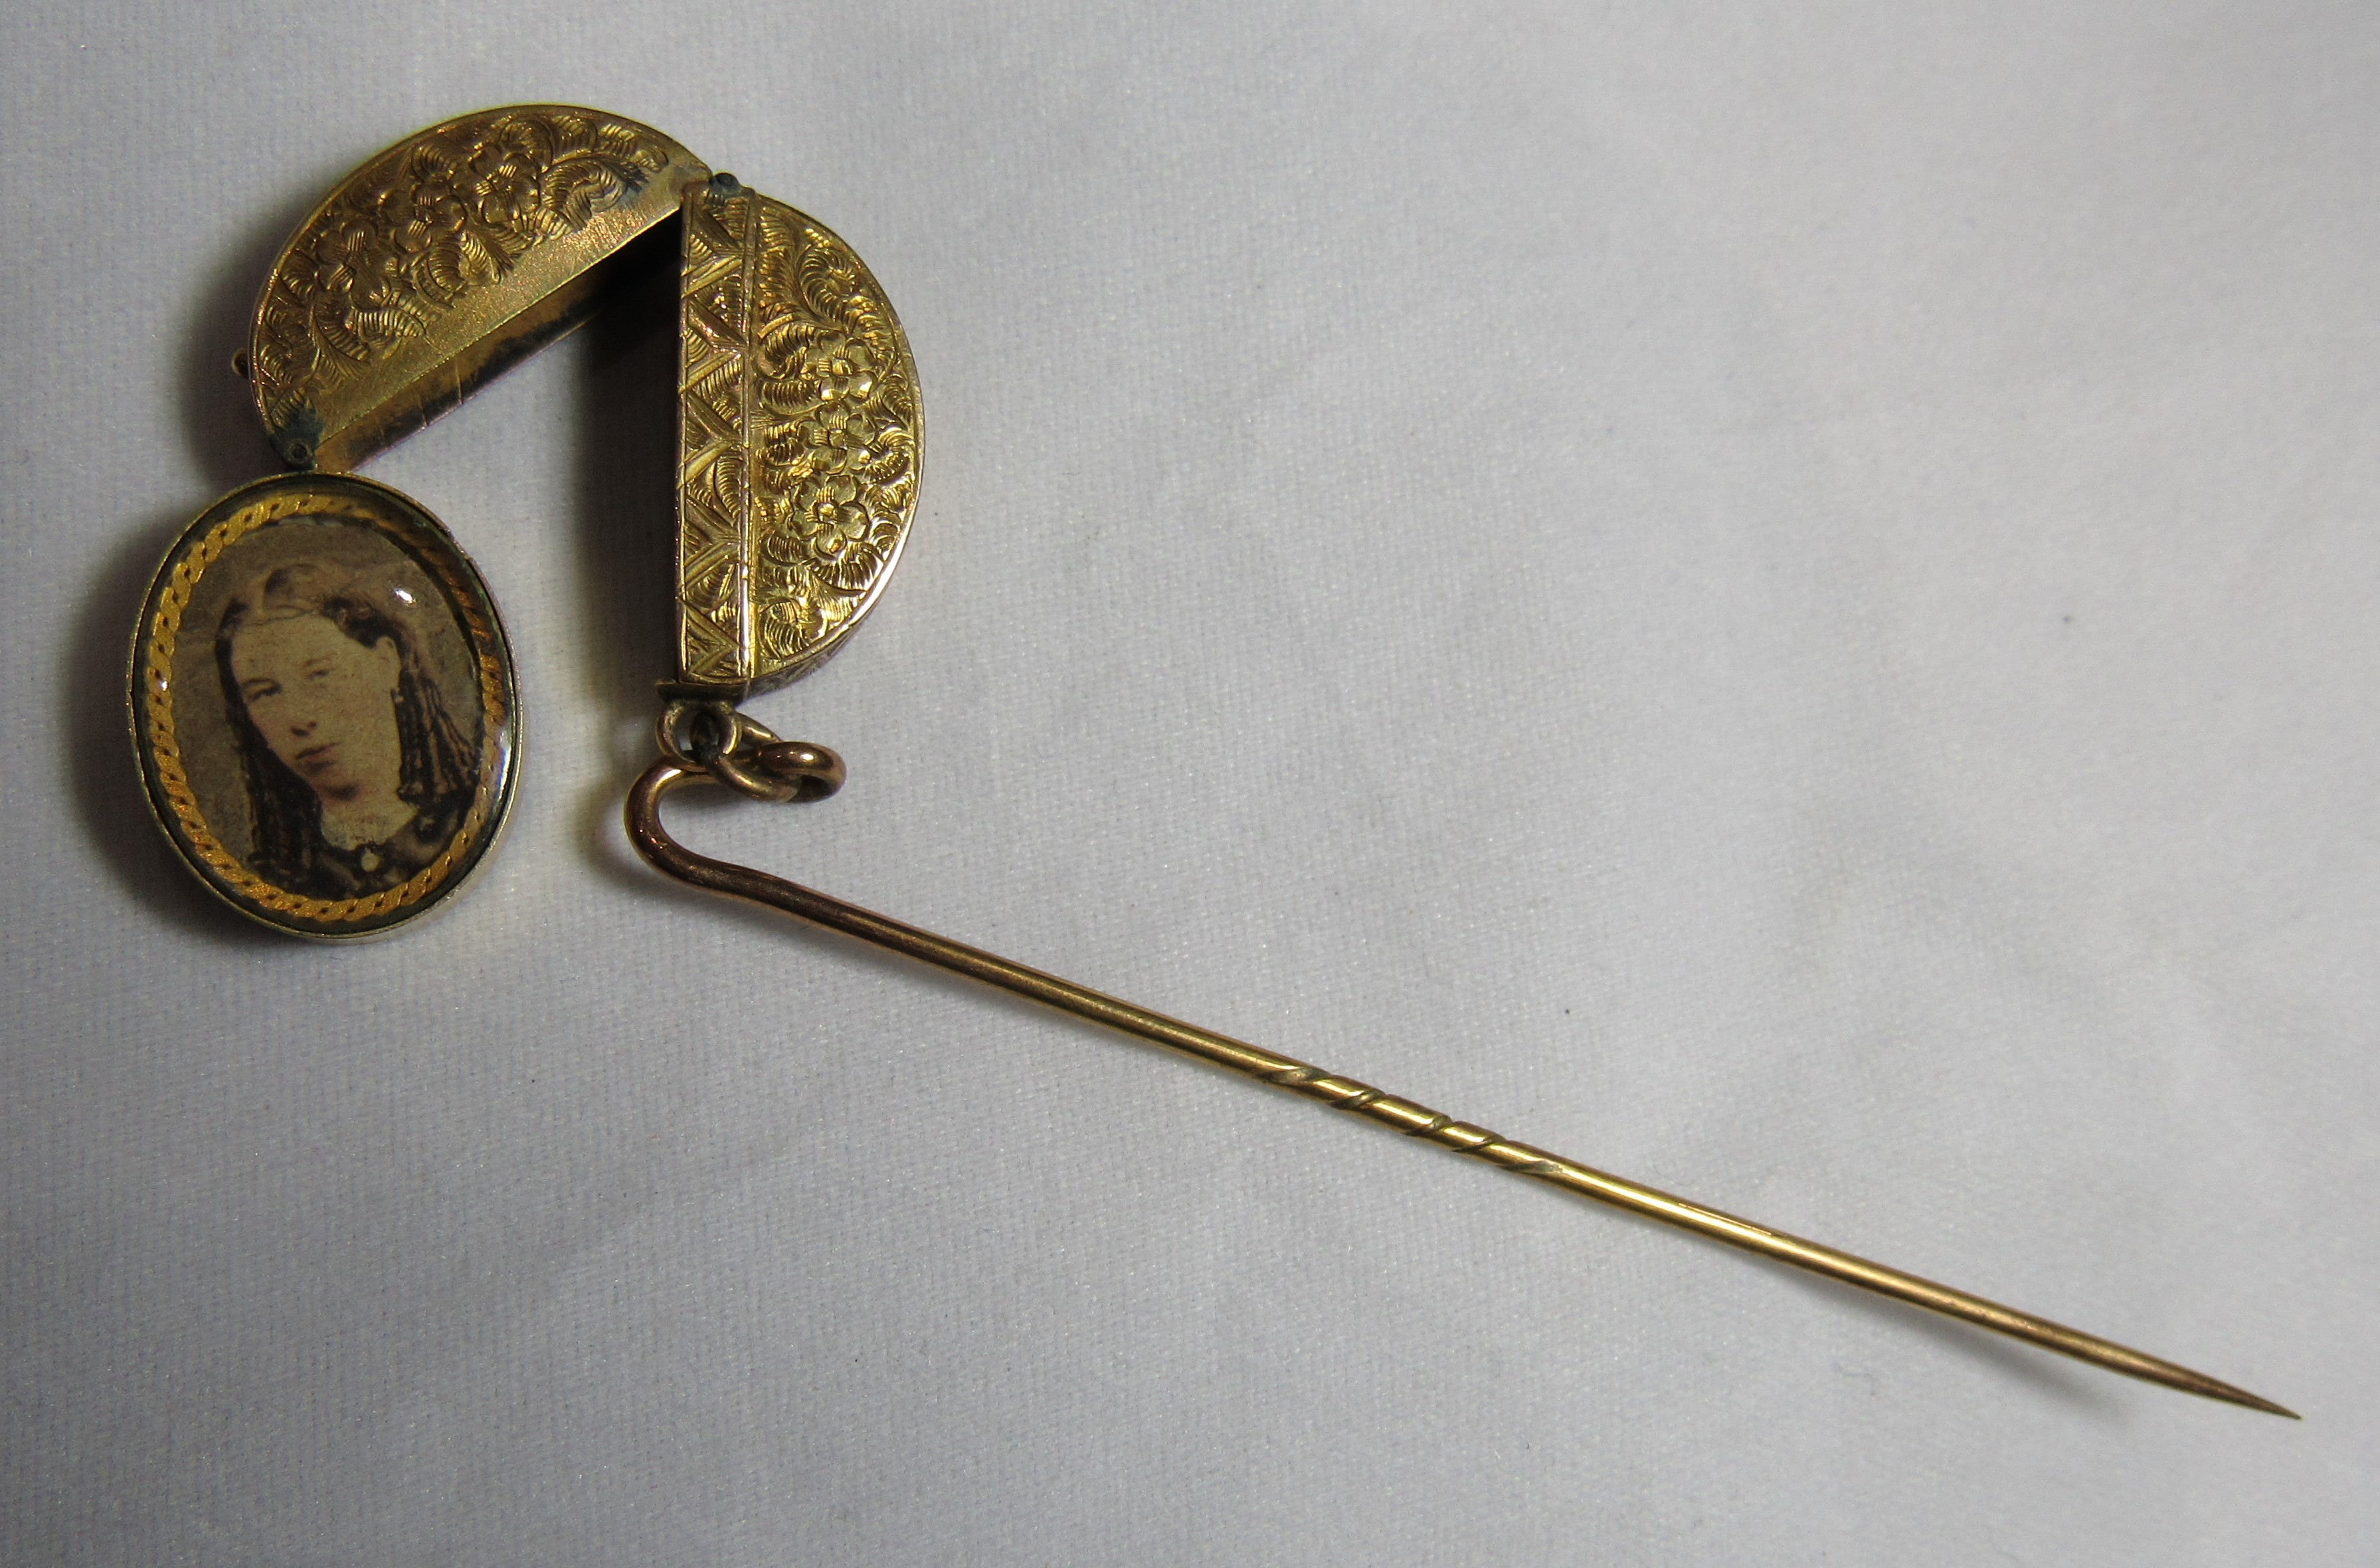 An unmarked gold or gilt hat pin with an attached oval locket with floral engraving and opens to - Image 3 of 3